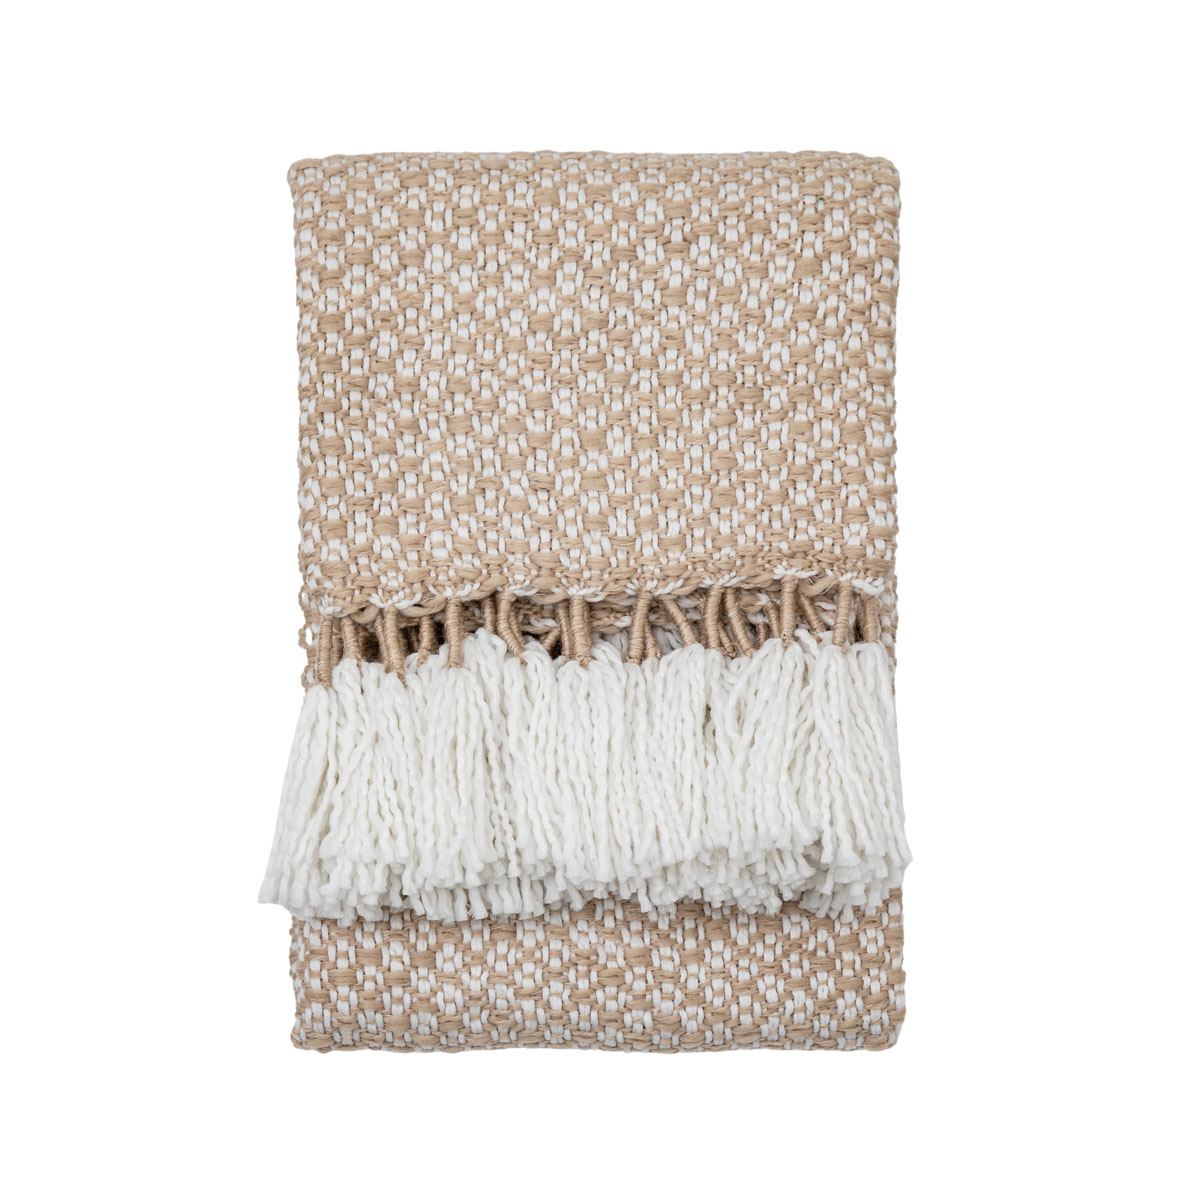 Woven Wrapped Tassel Throw Natural 1300x1700mm